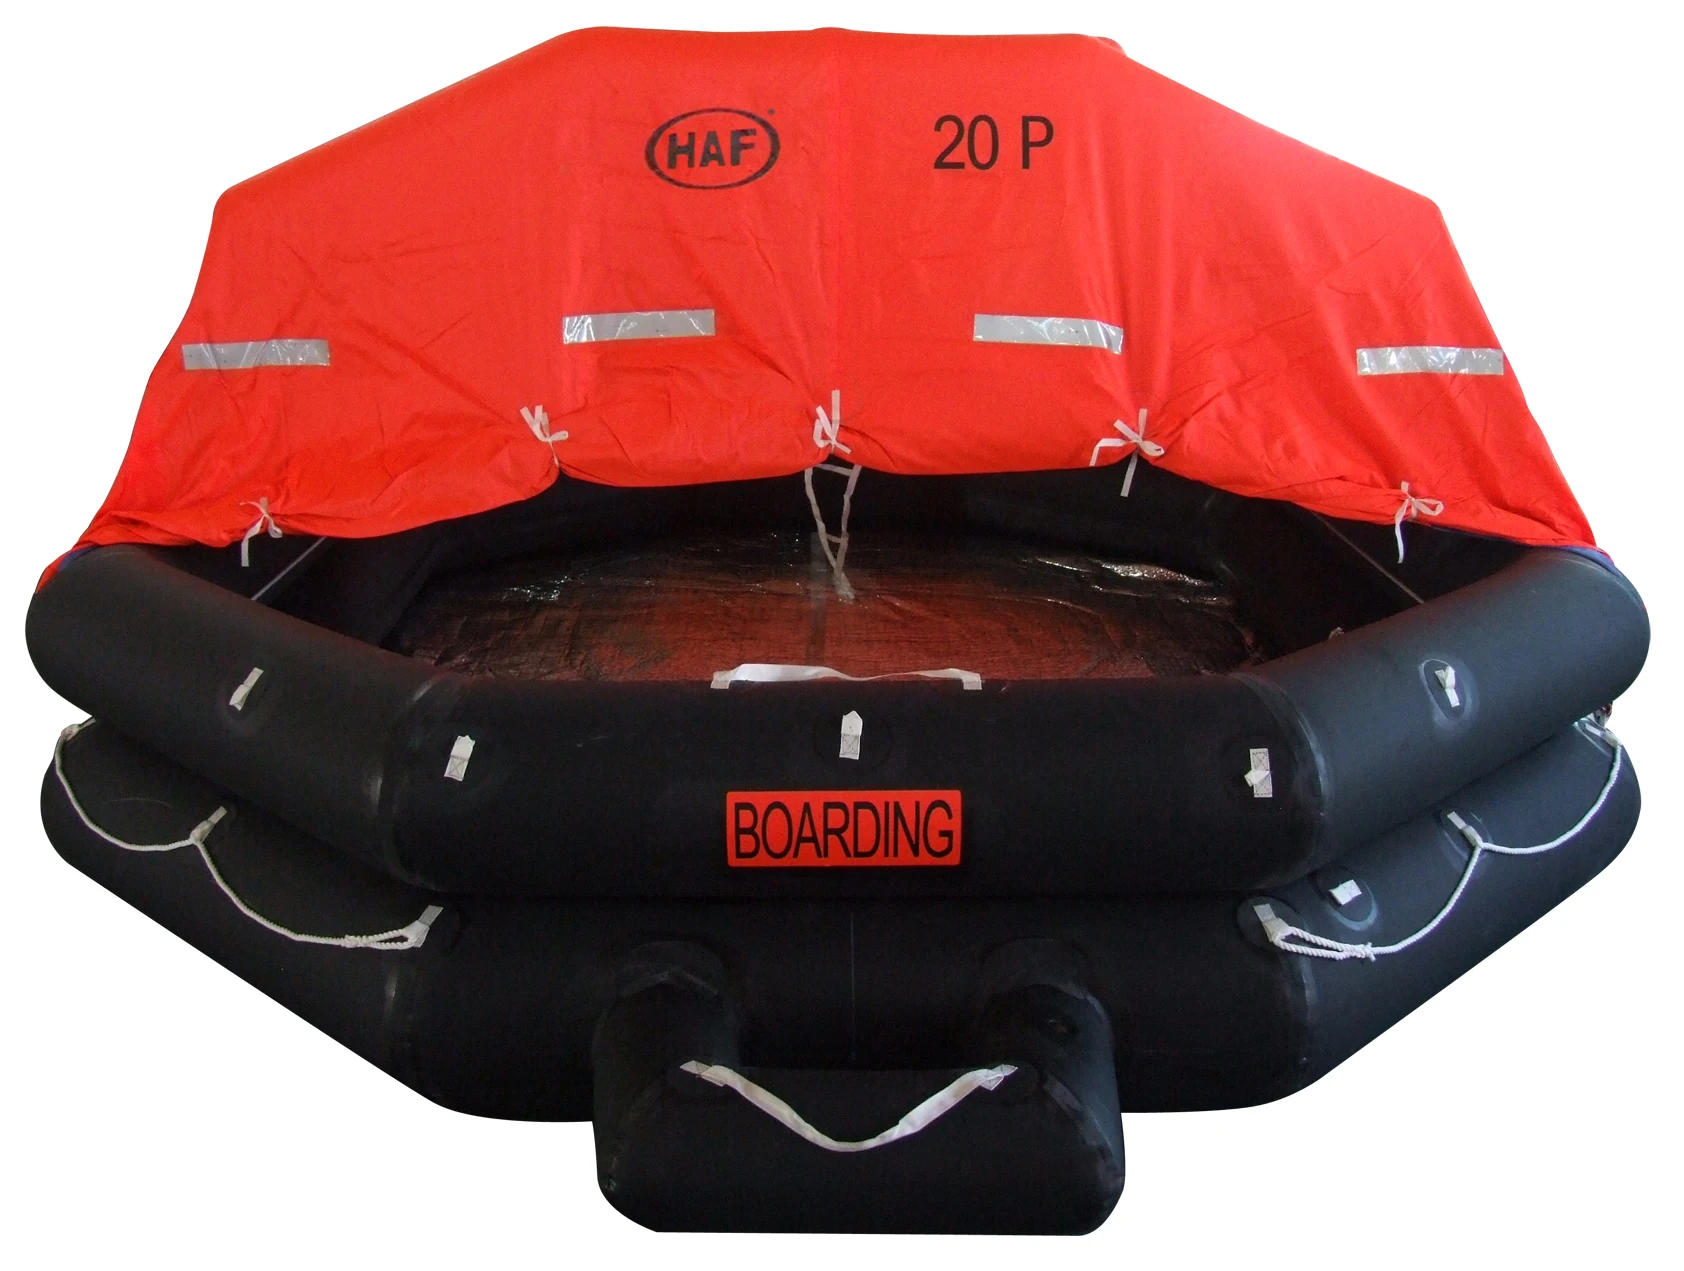 Solas approved self righting inflatable life raft for 20P with ccs certificate